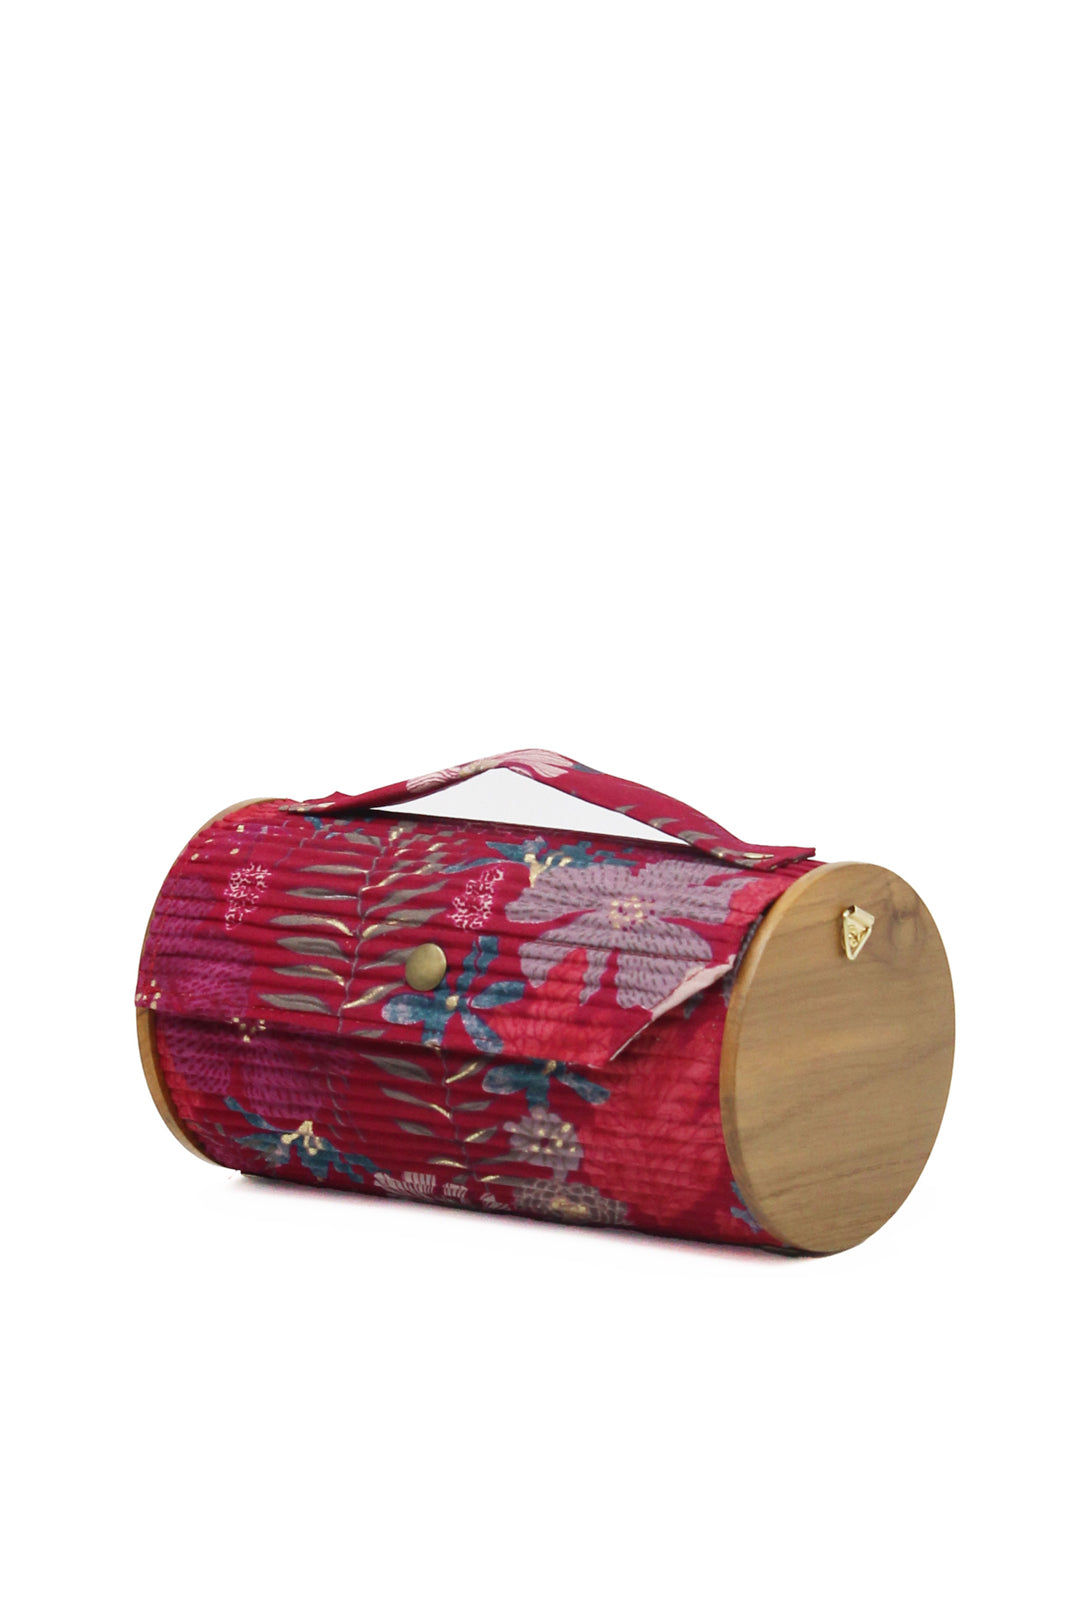 Petal Perfection Round Clutch - Single Sleeve